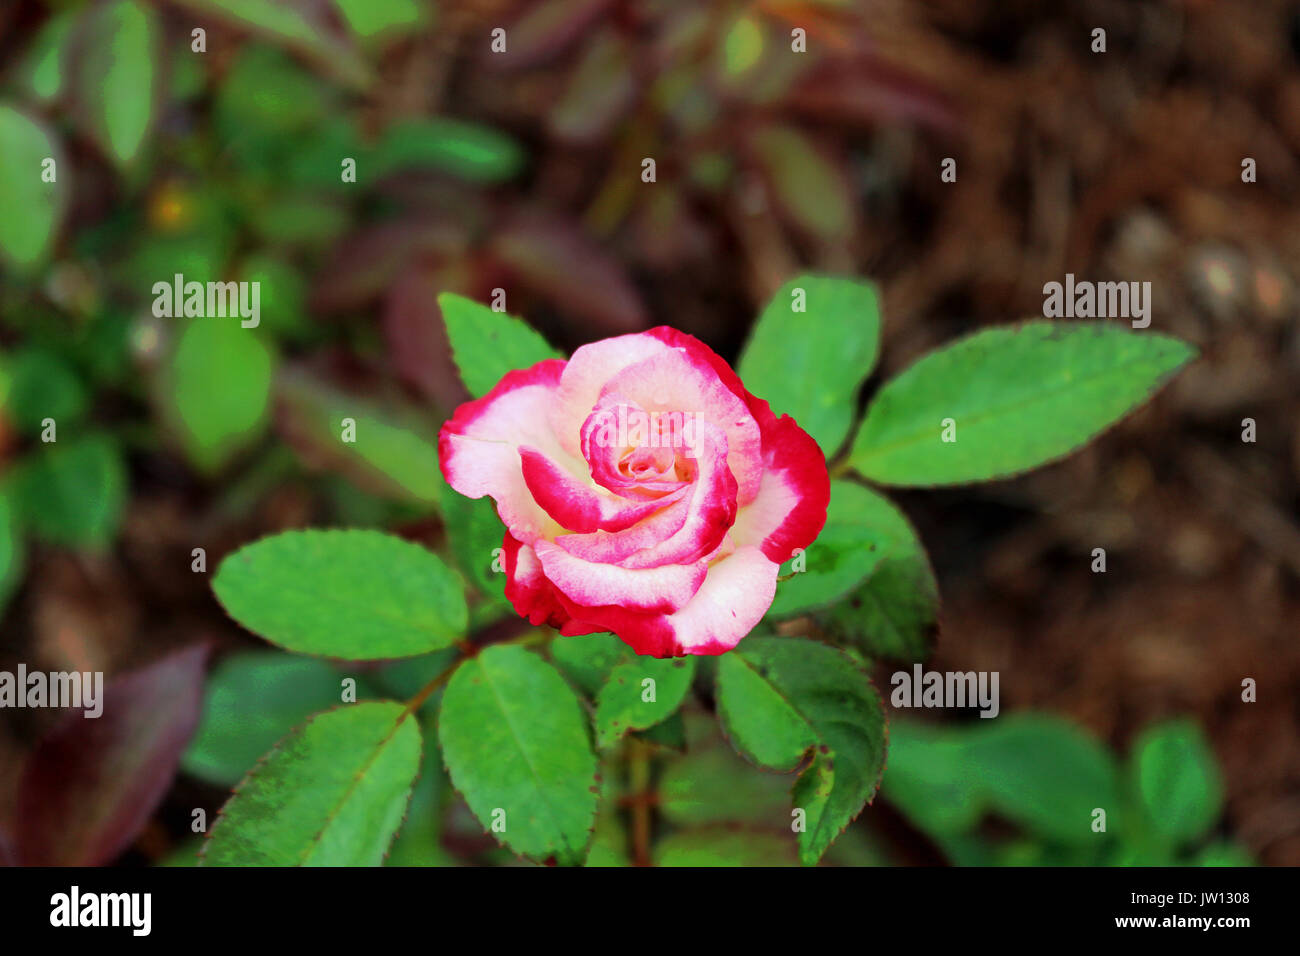 A Small White / Red / Pink Rose with bright green leaves. Stock Photo